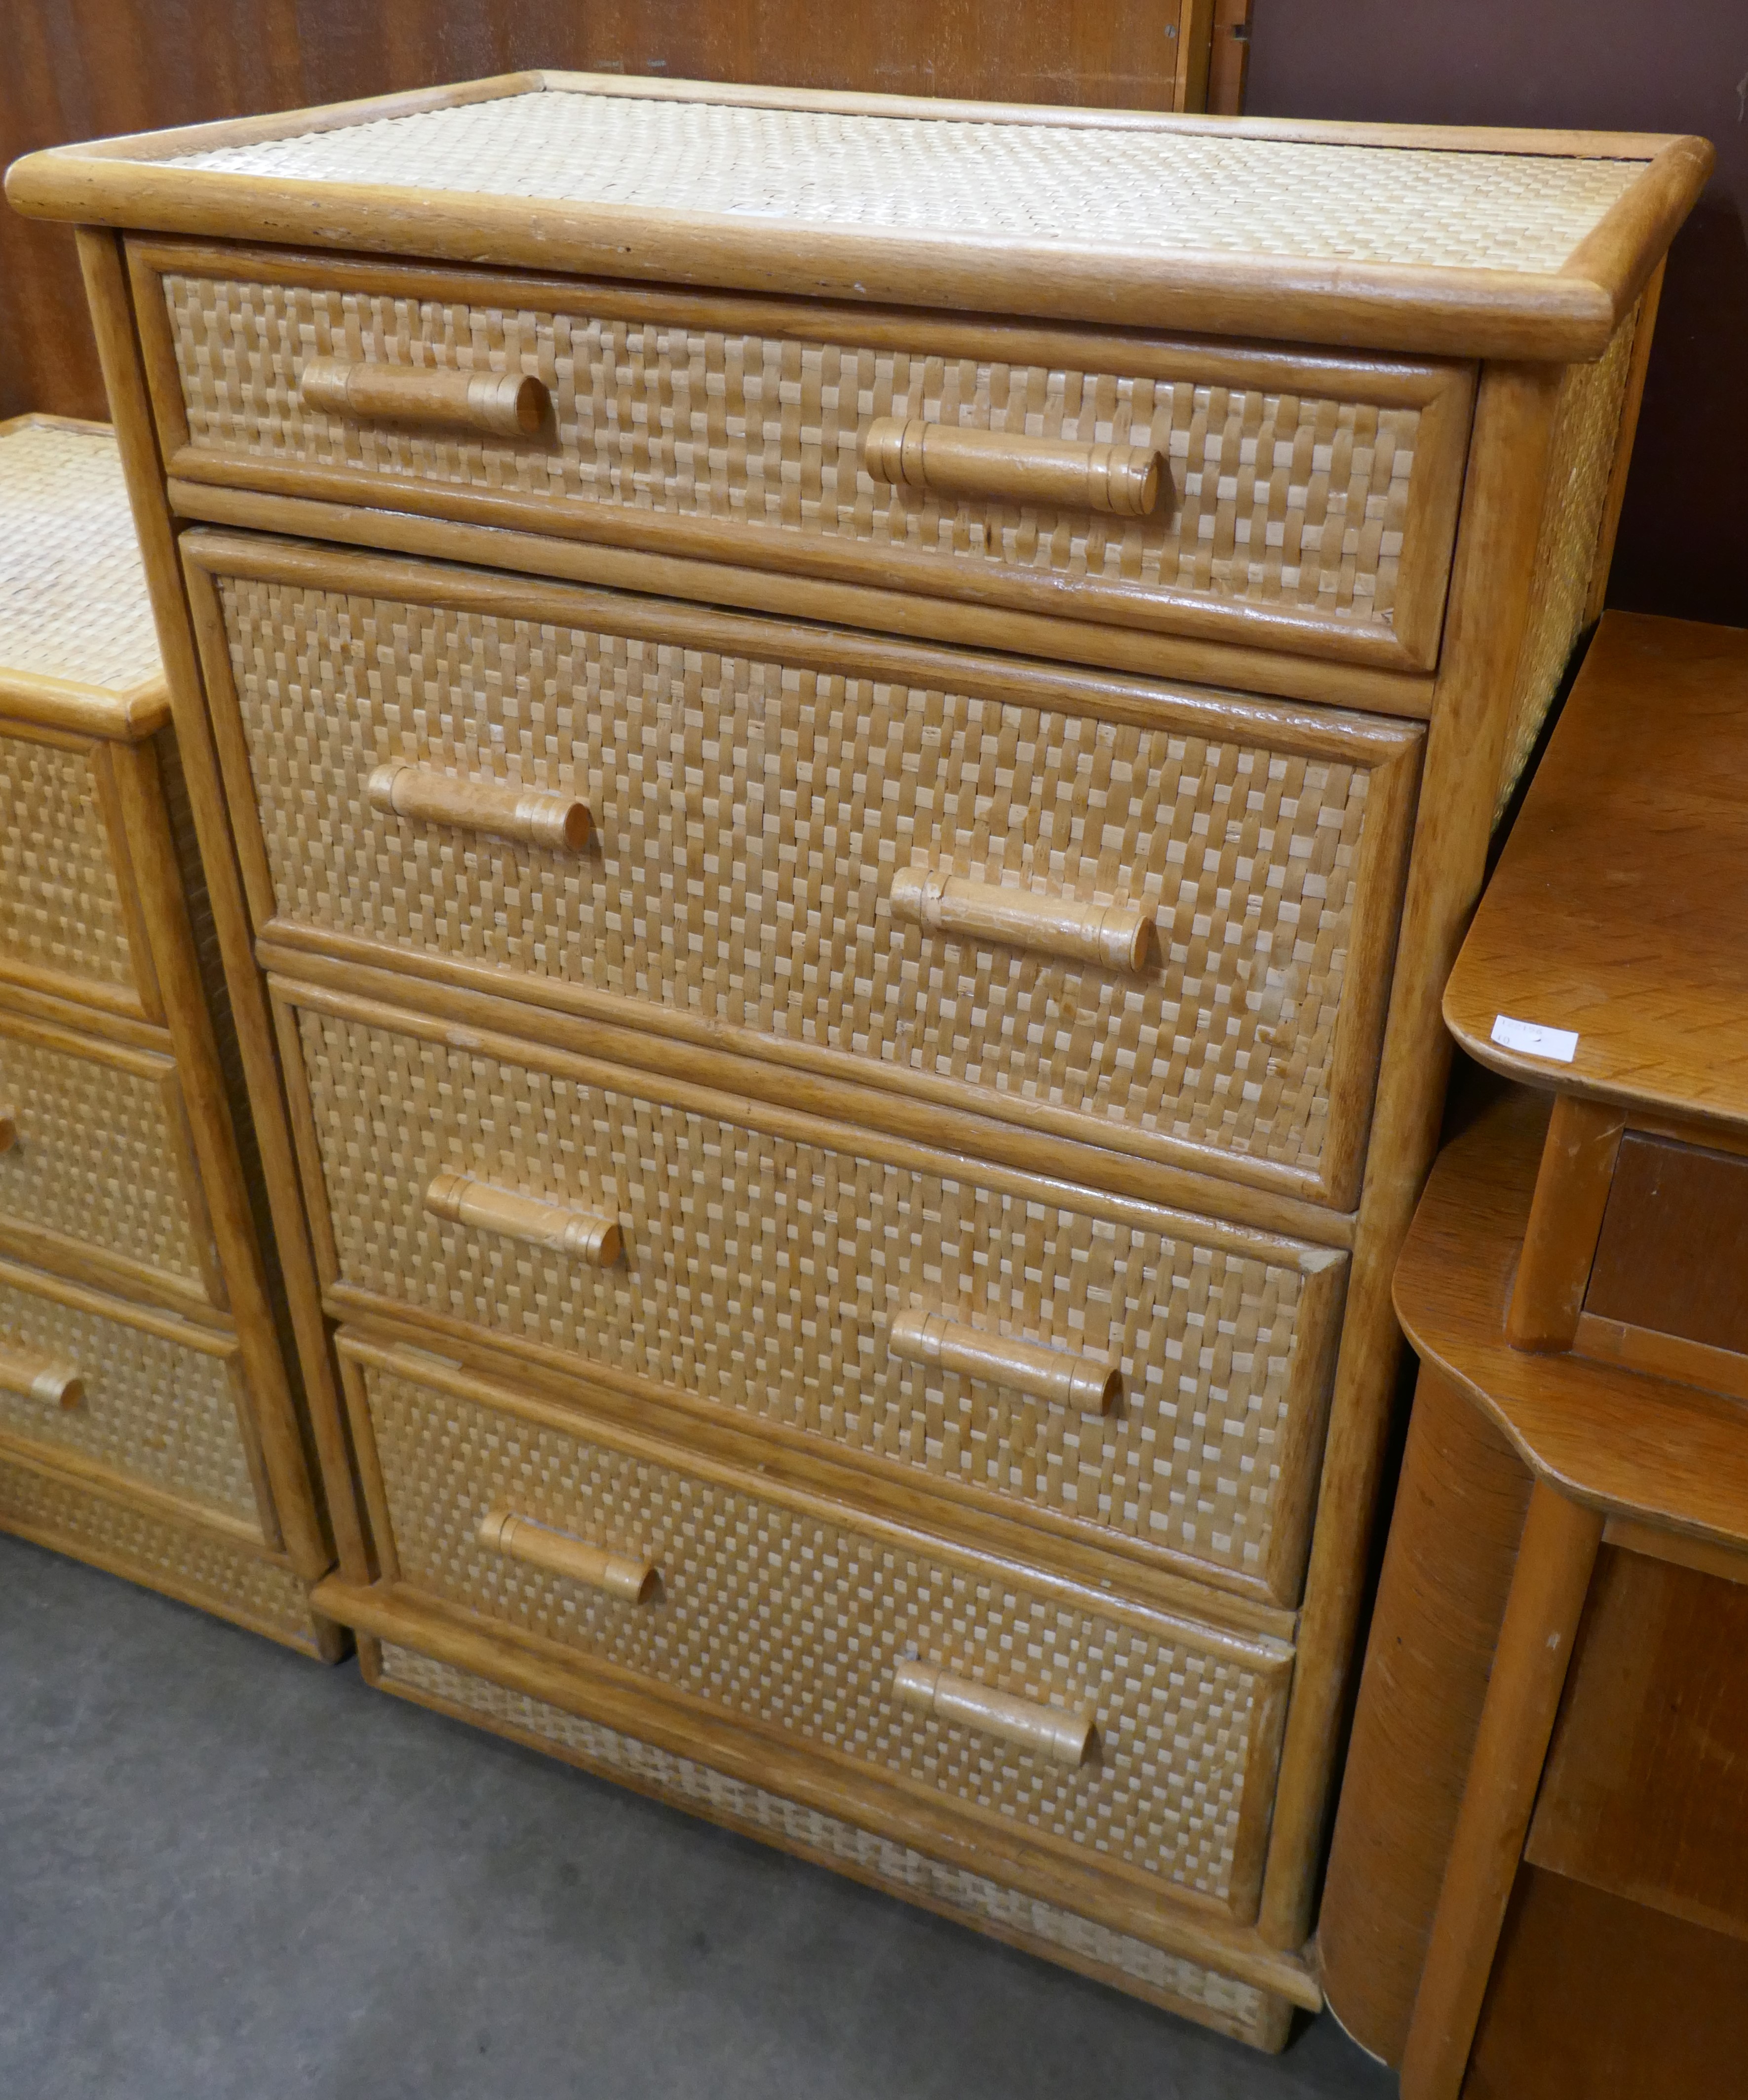 An Italian style bamboo and rattan chest of drawers - Image 2 of 2